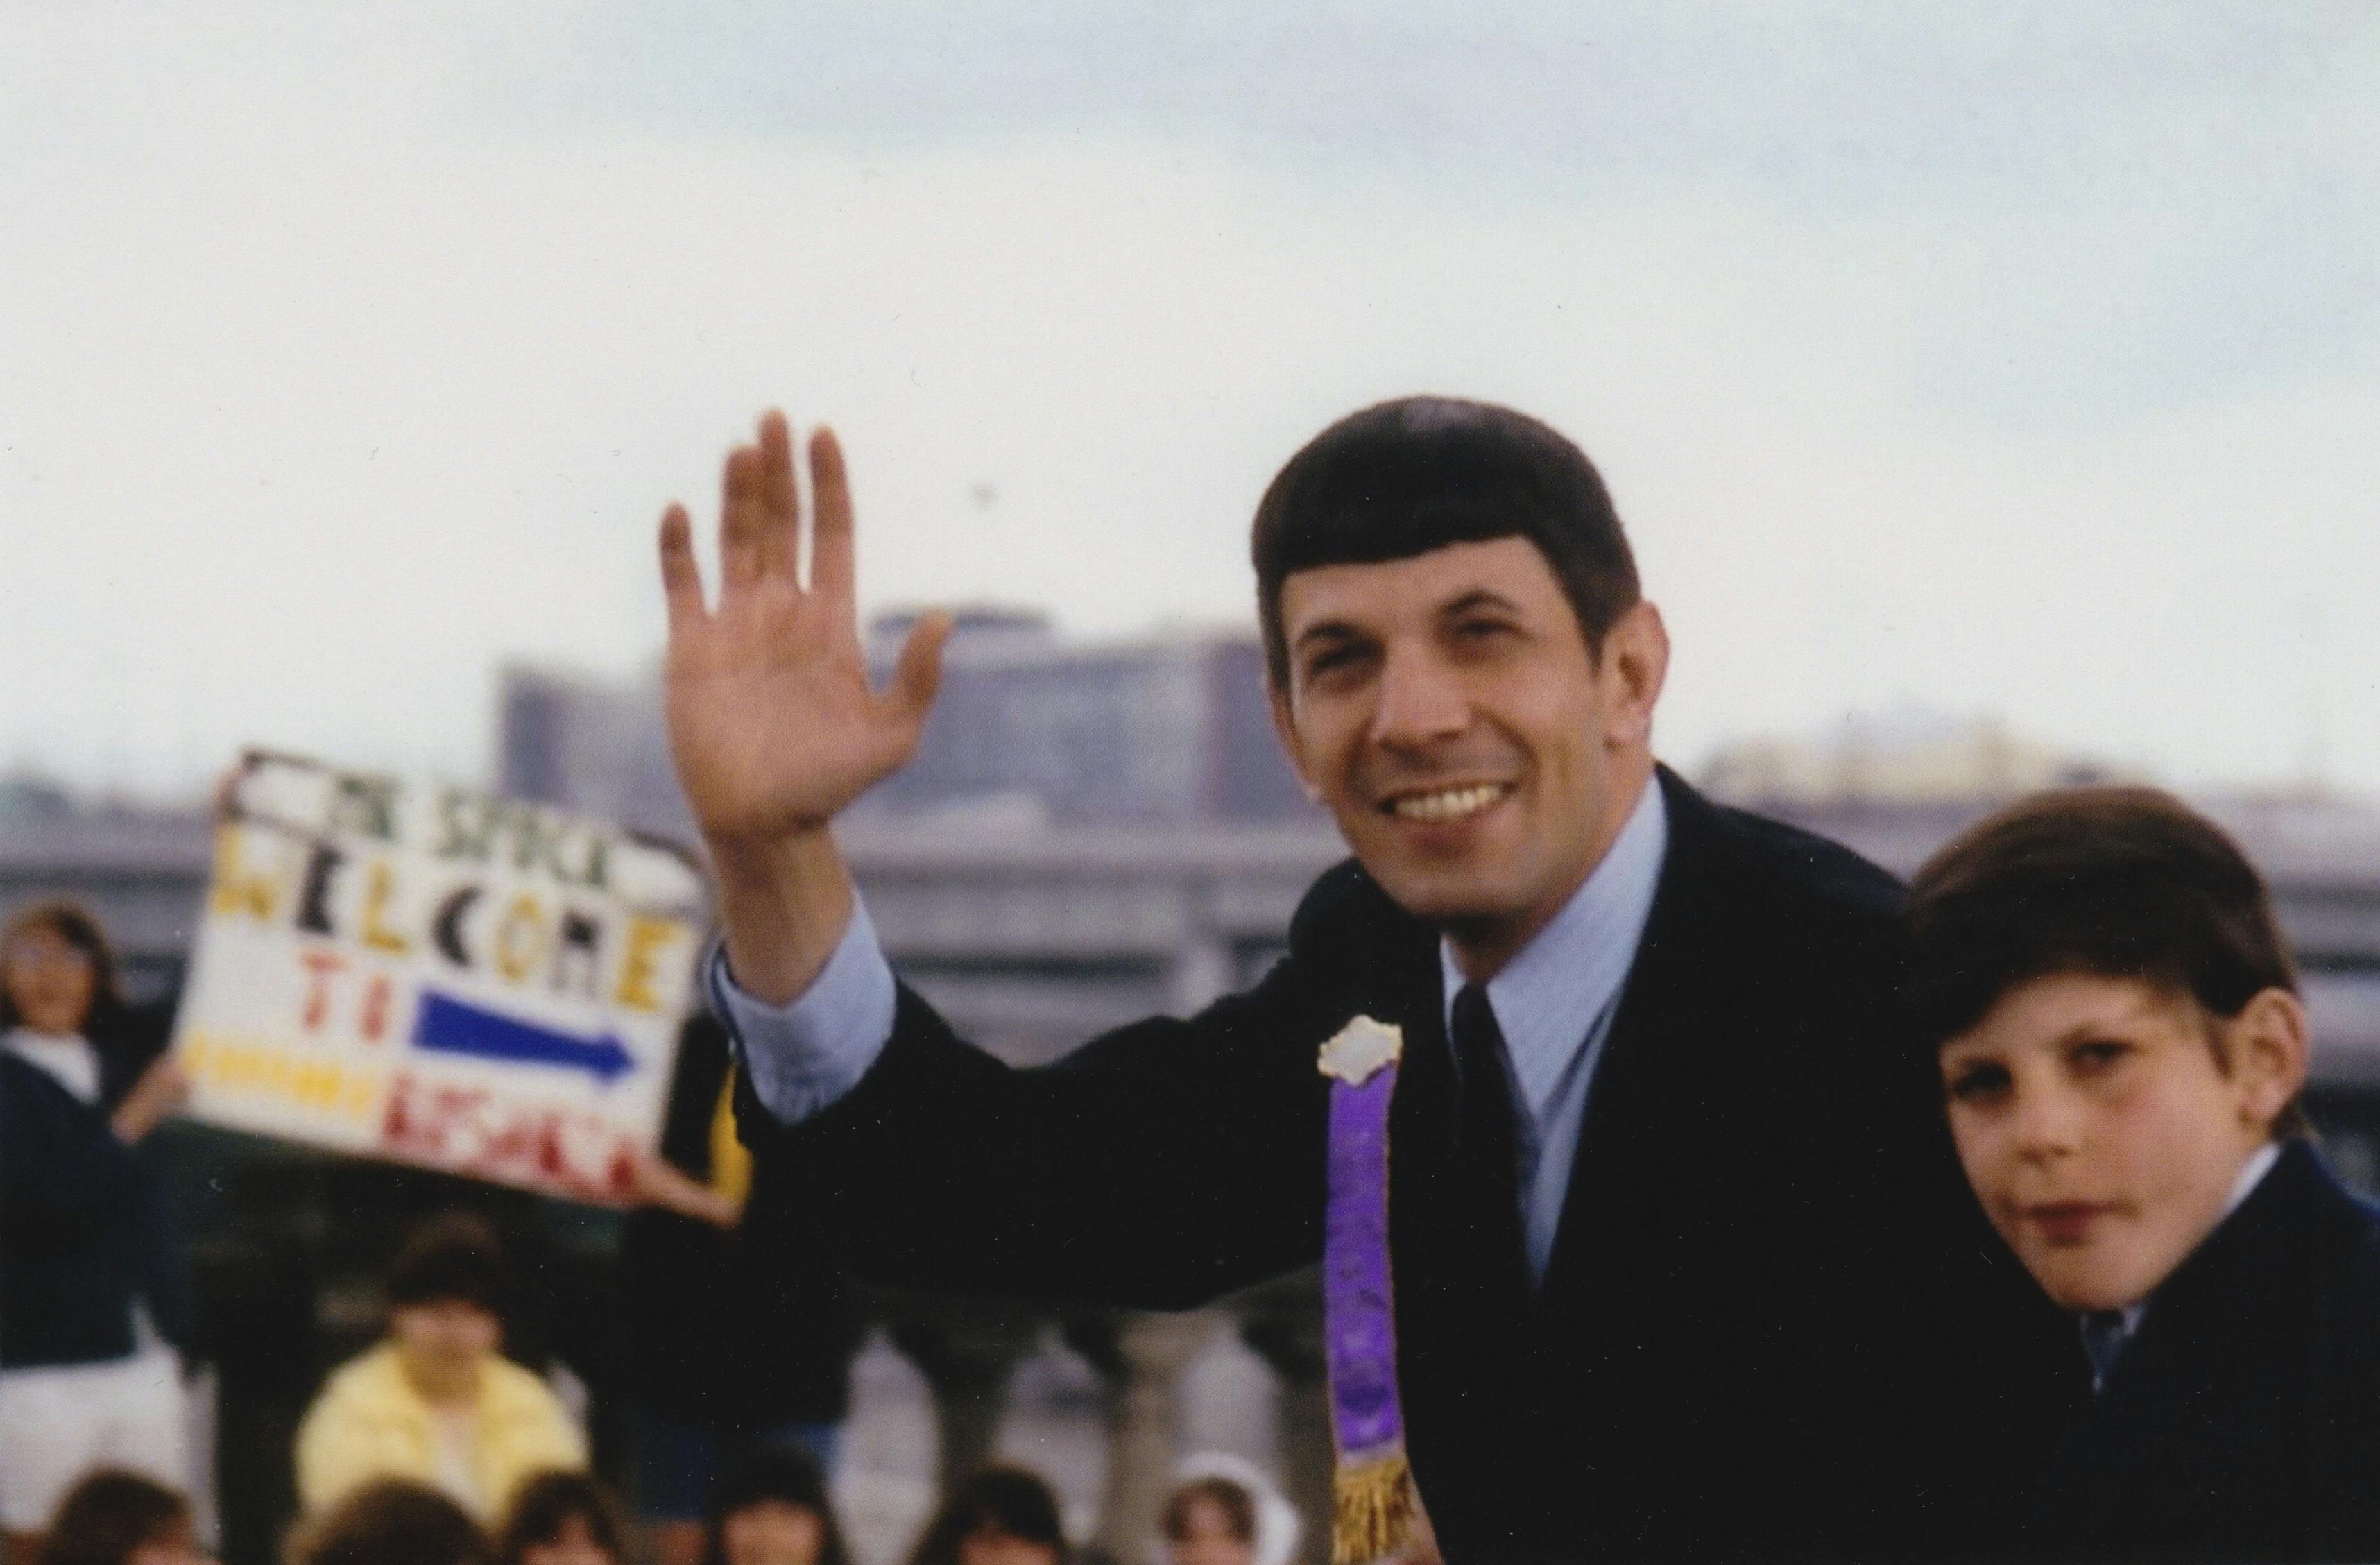 At an event, Leonard Nimoy smiles and waves to a crowd while his son Adam sits next to him